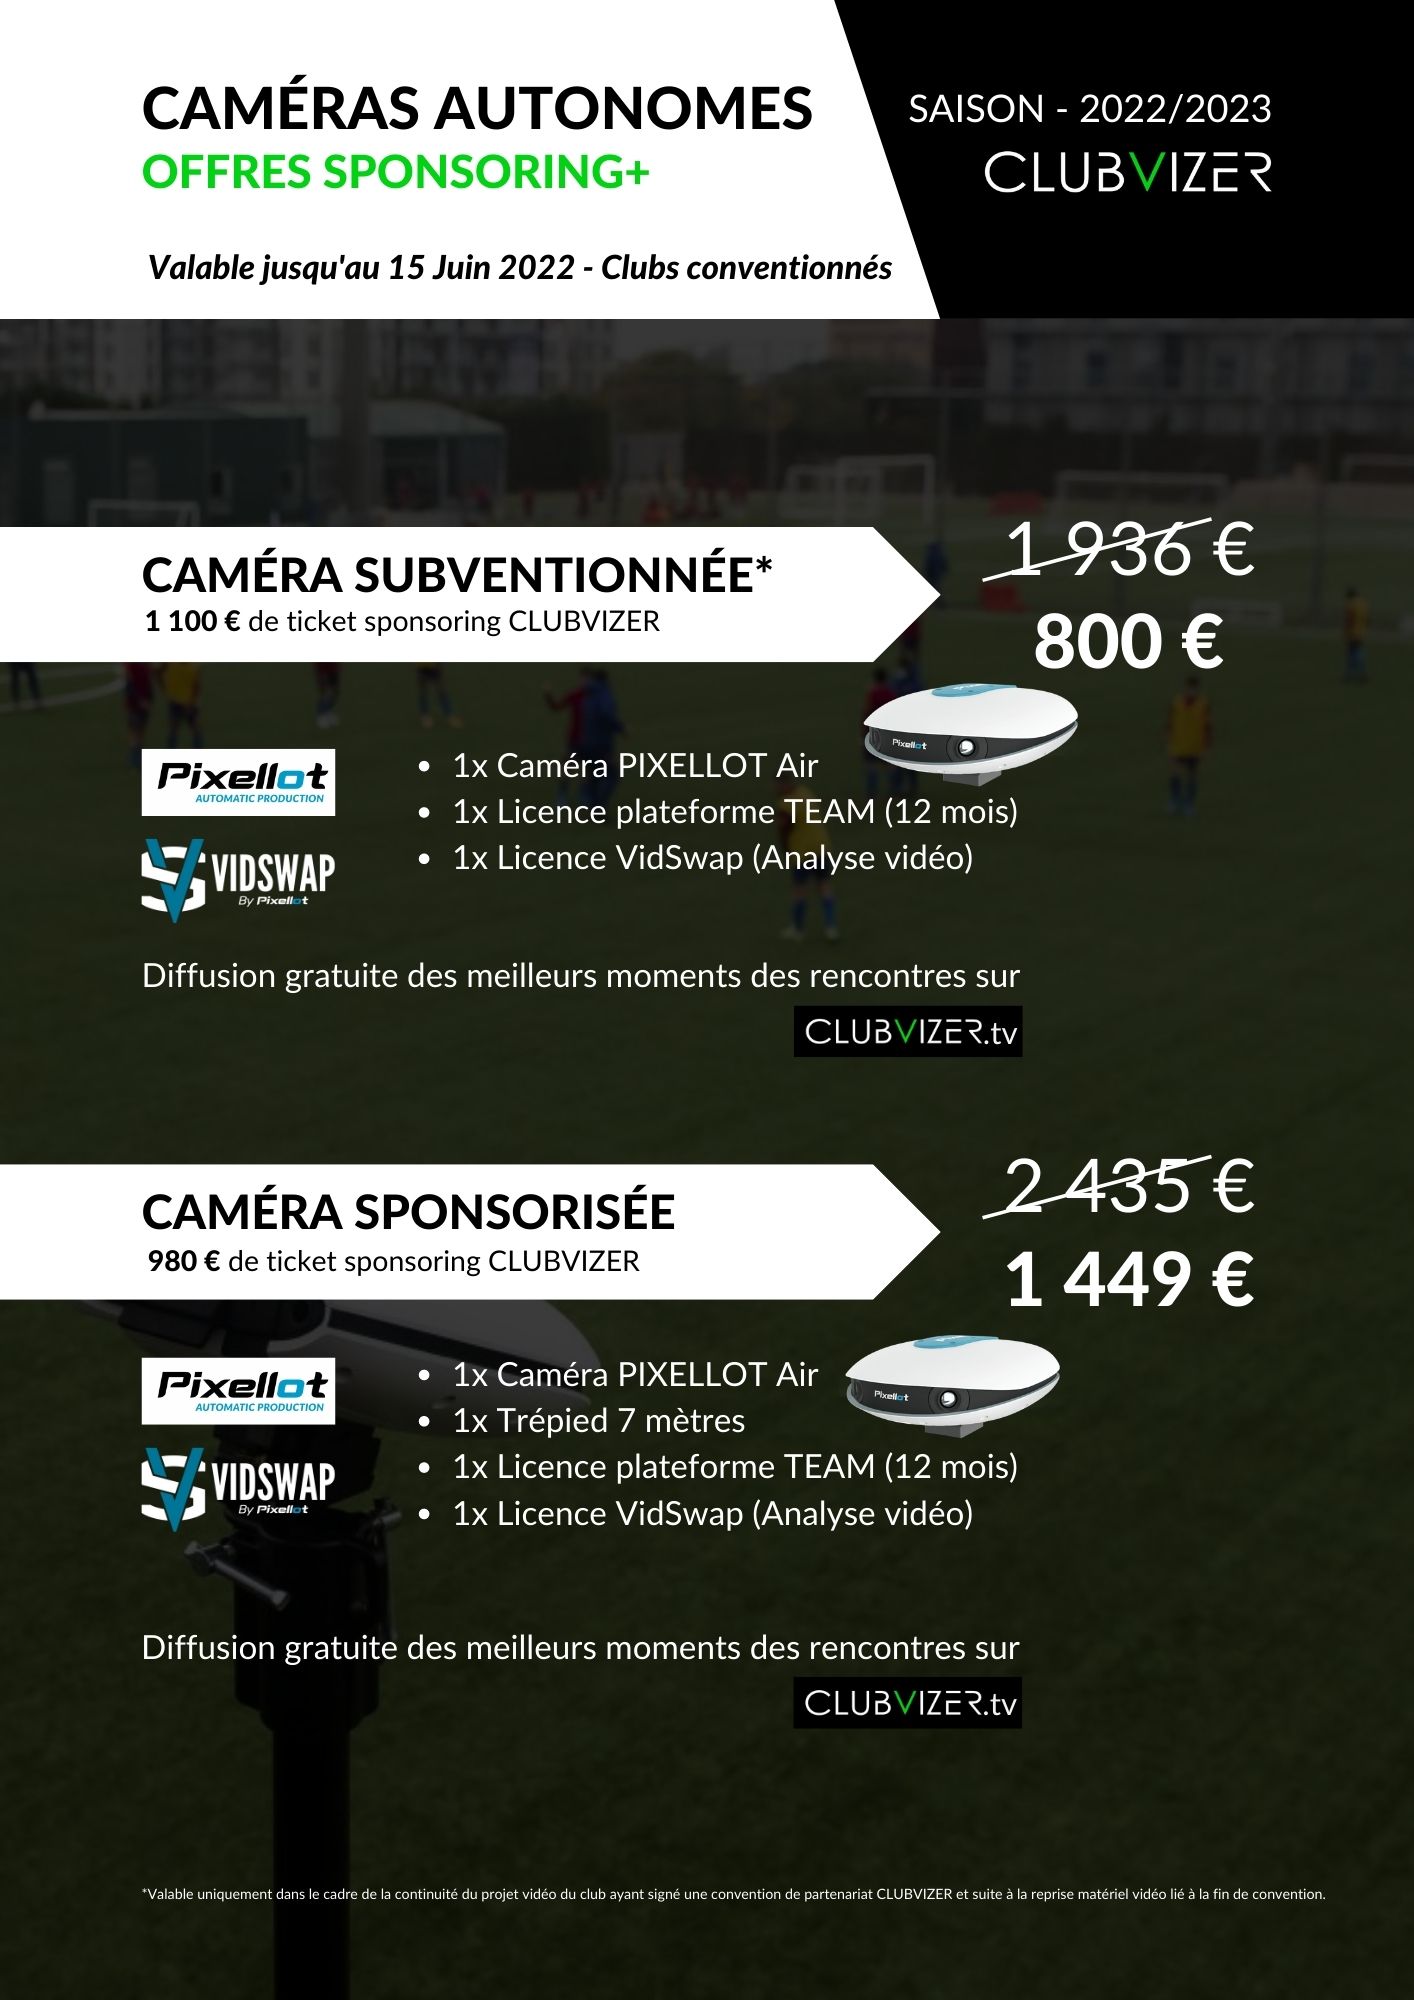 CLUBS CONVENTIONNES - CAMERAS SUBV